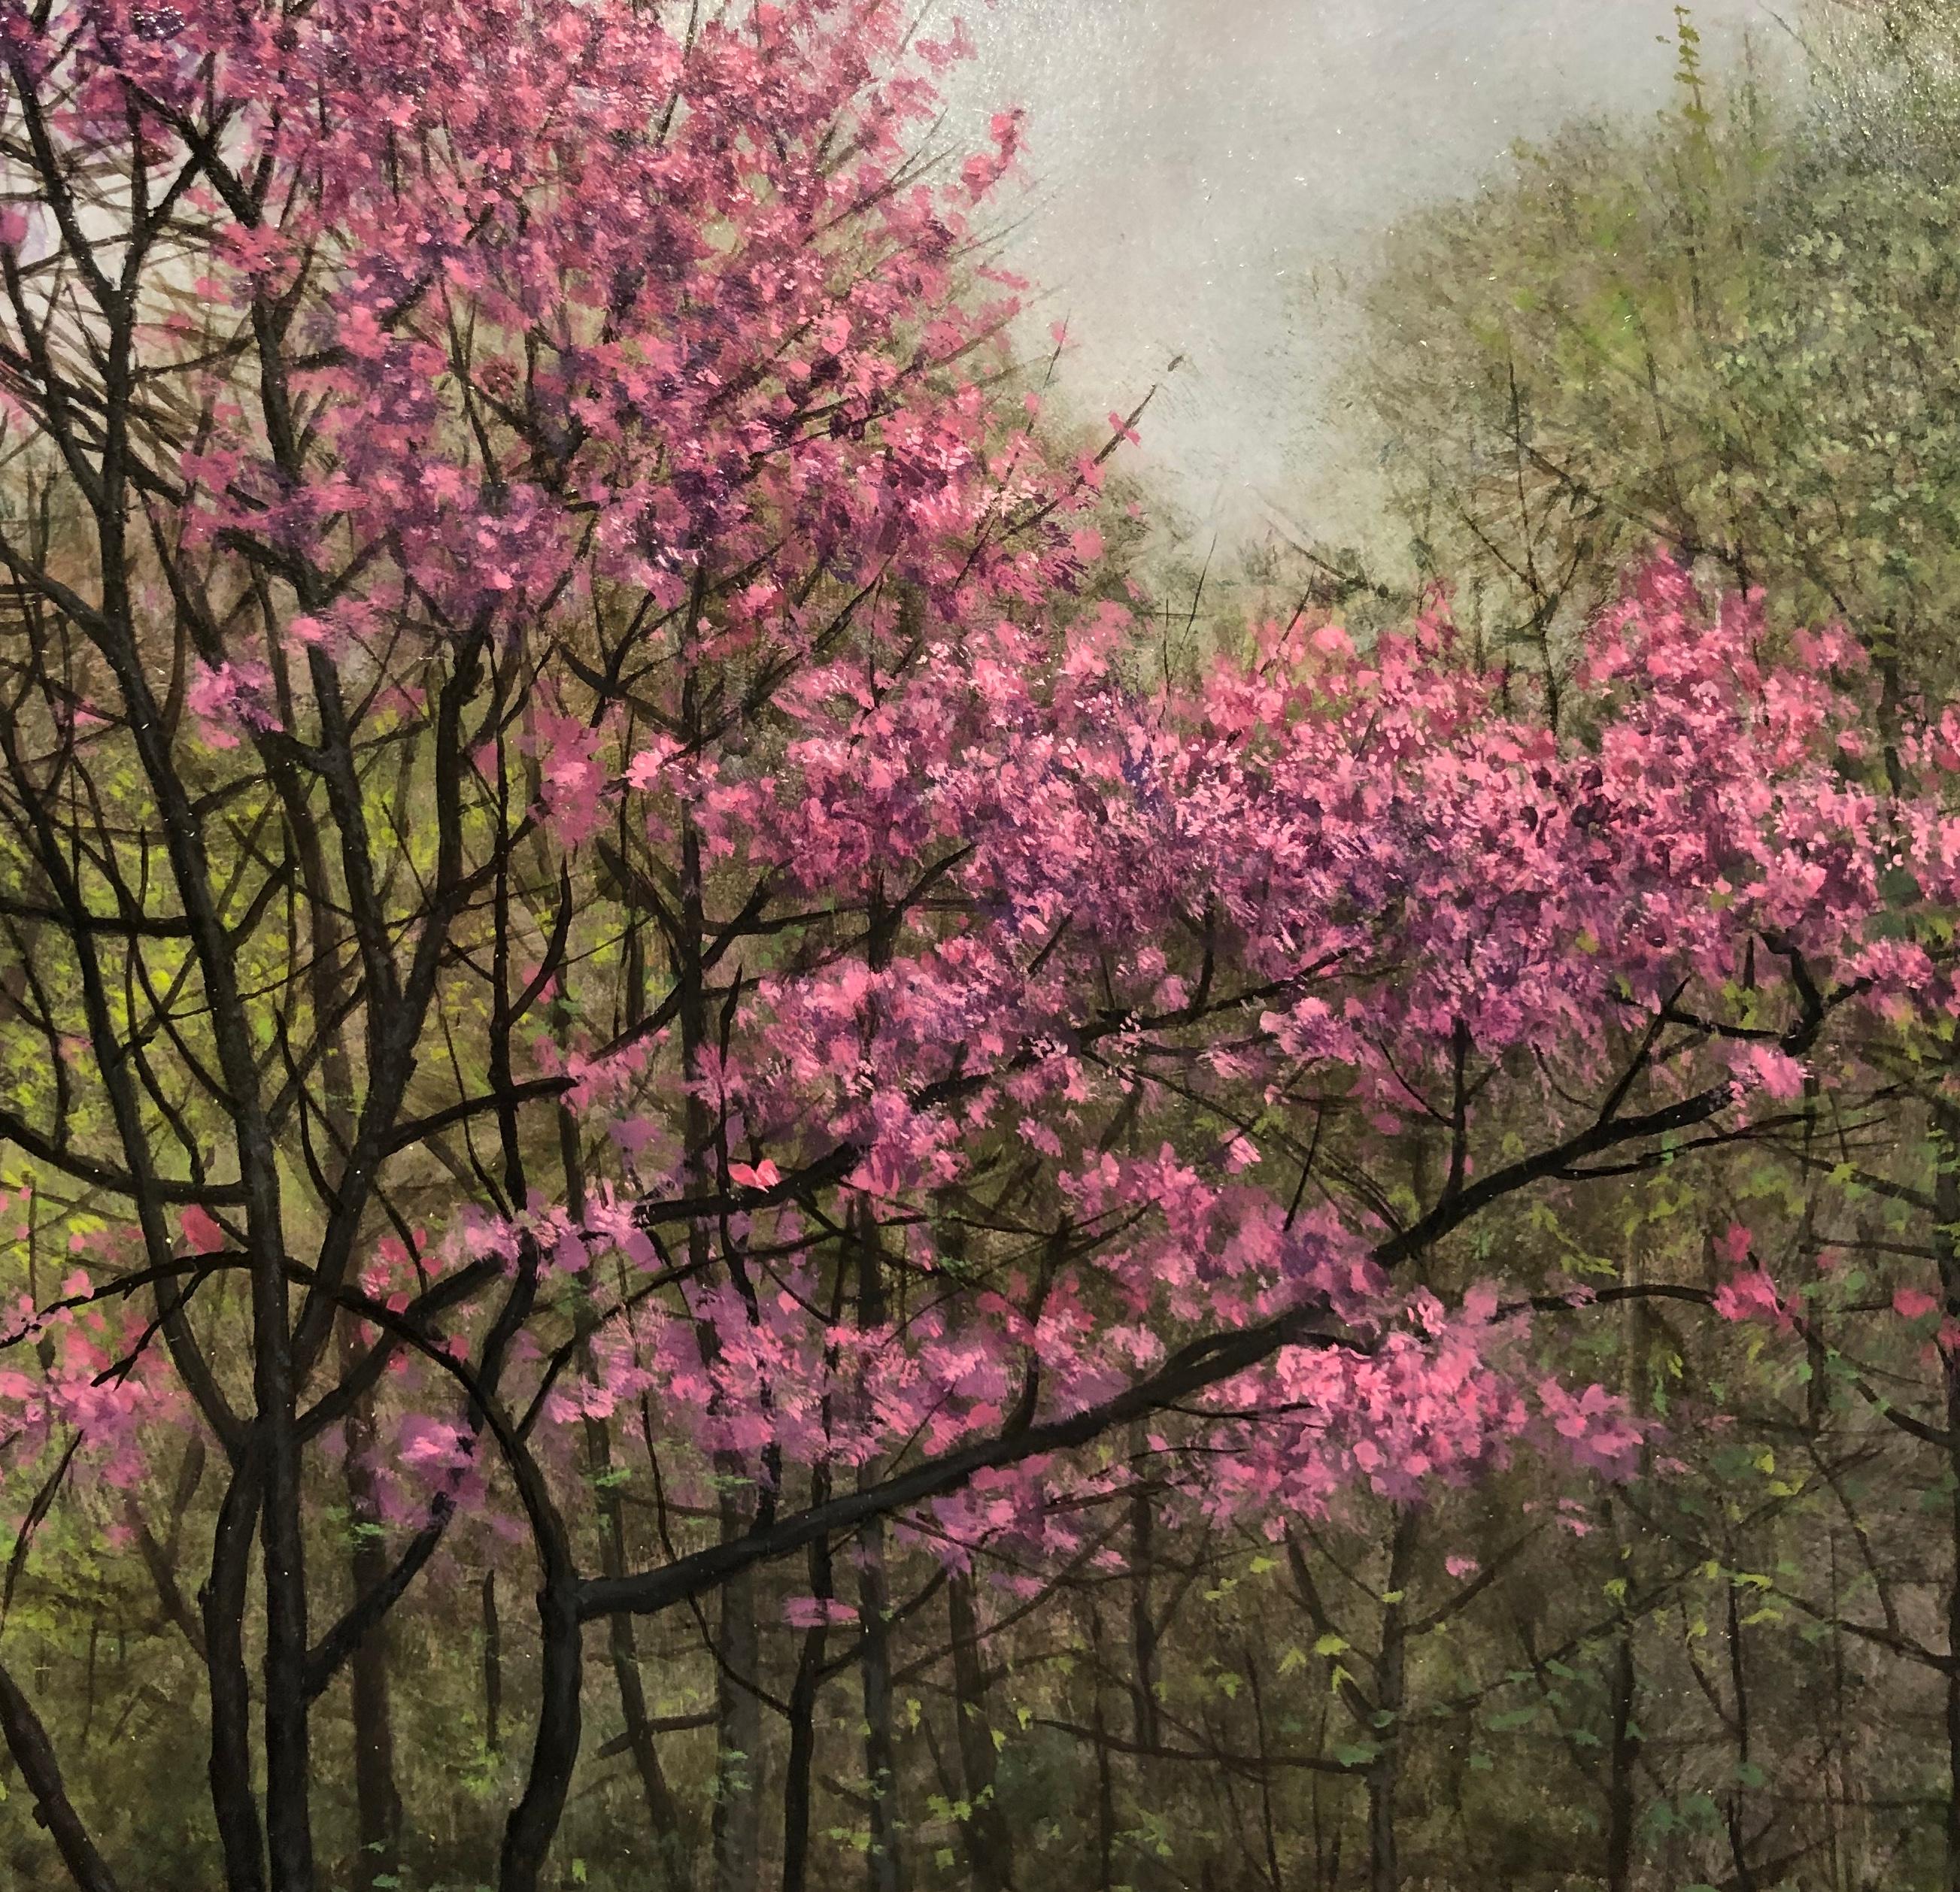 This contemplative oil painting by Jeff Aeling captures spring in all its beauty.  The redbud is in full bloom with its tiny bright pink flowers bringing the dormant winter woods into the rebirth of spring.  Painted in a style that blends